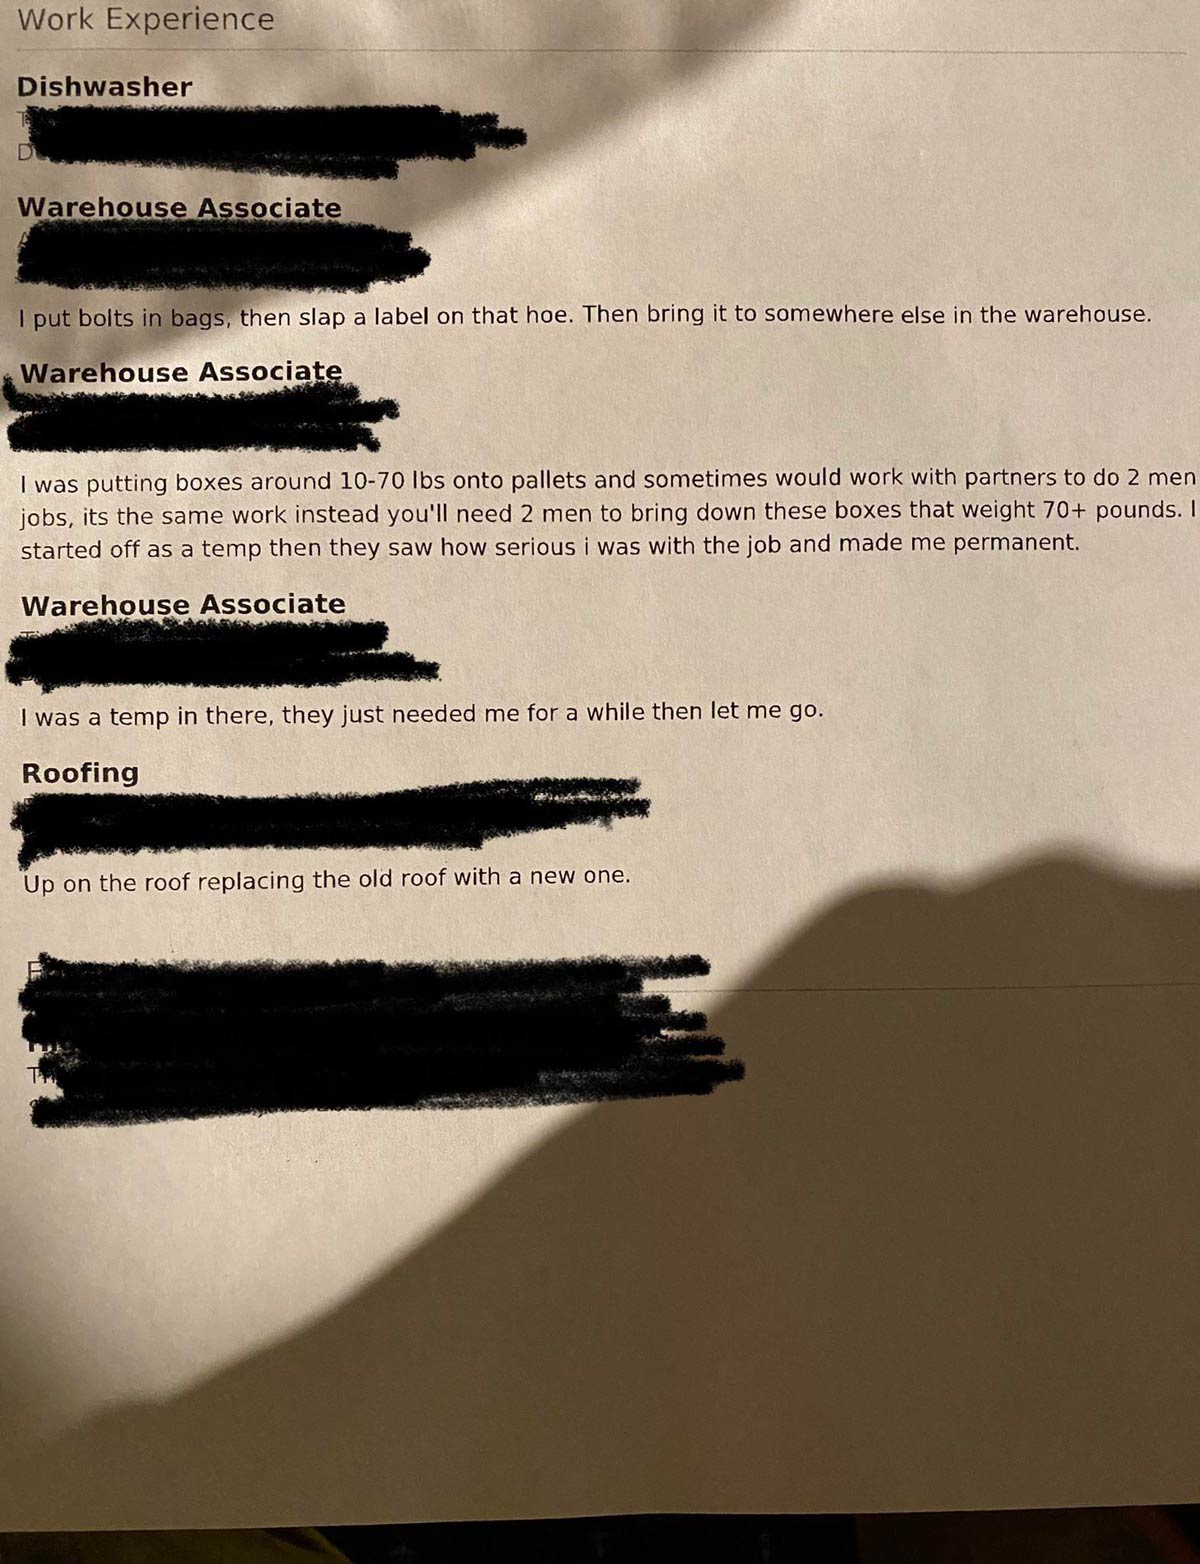 Wife’s employer received this resume for a position. He got an interview because the manager couldn’t stop laughing